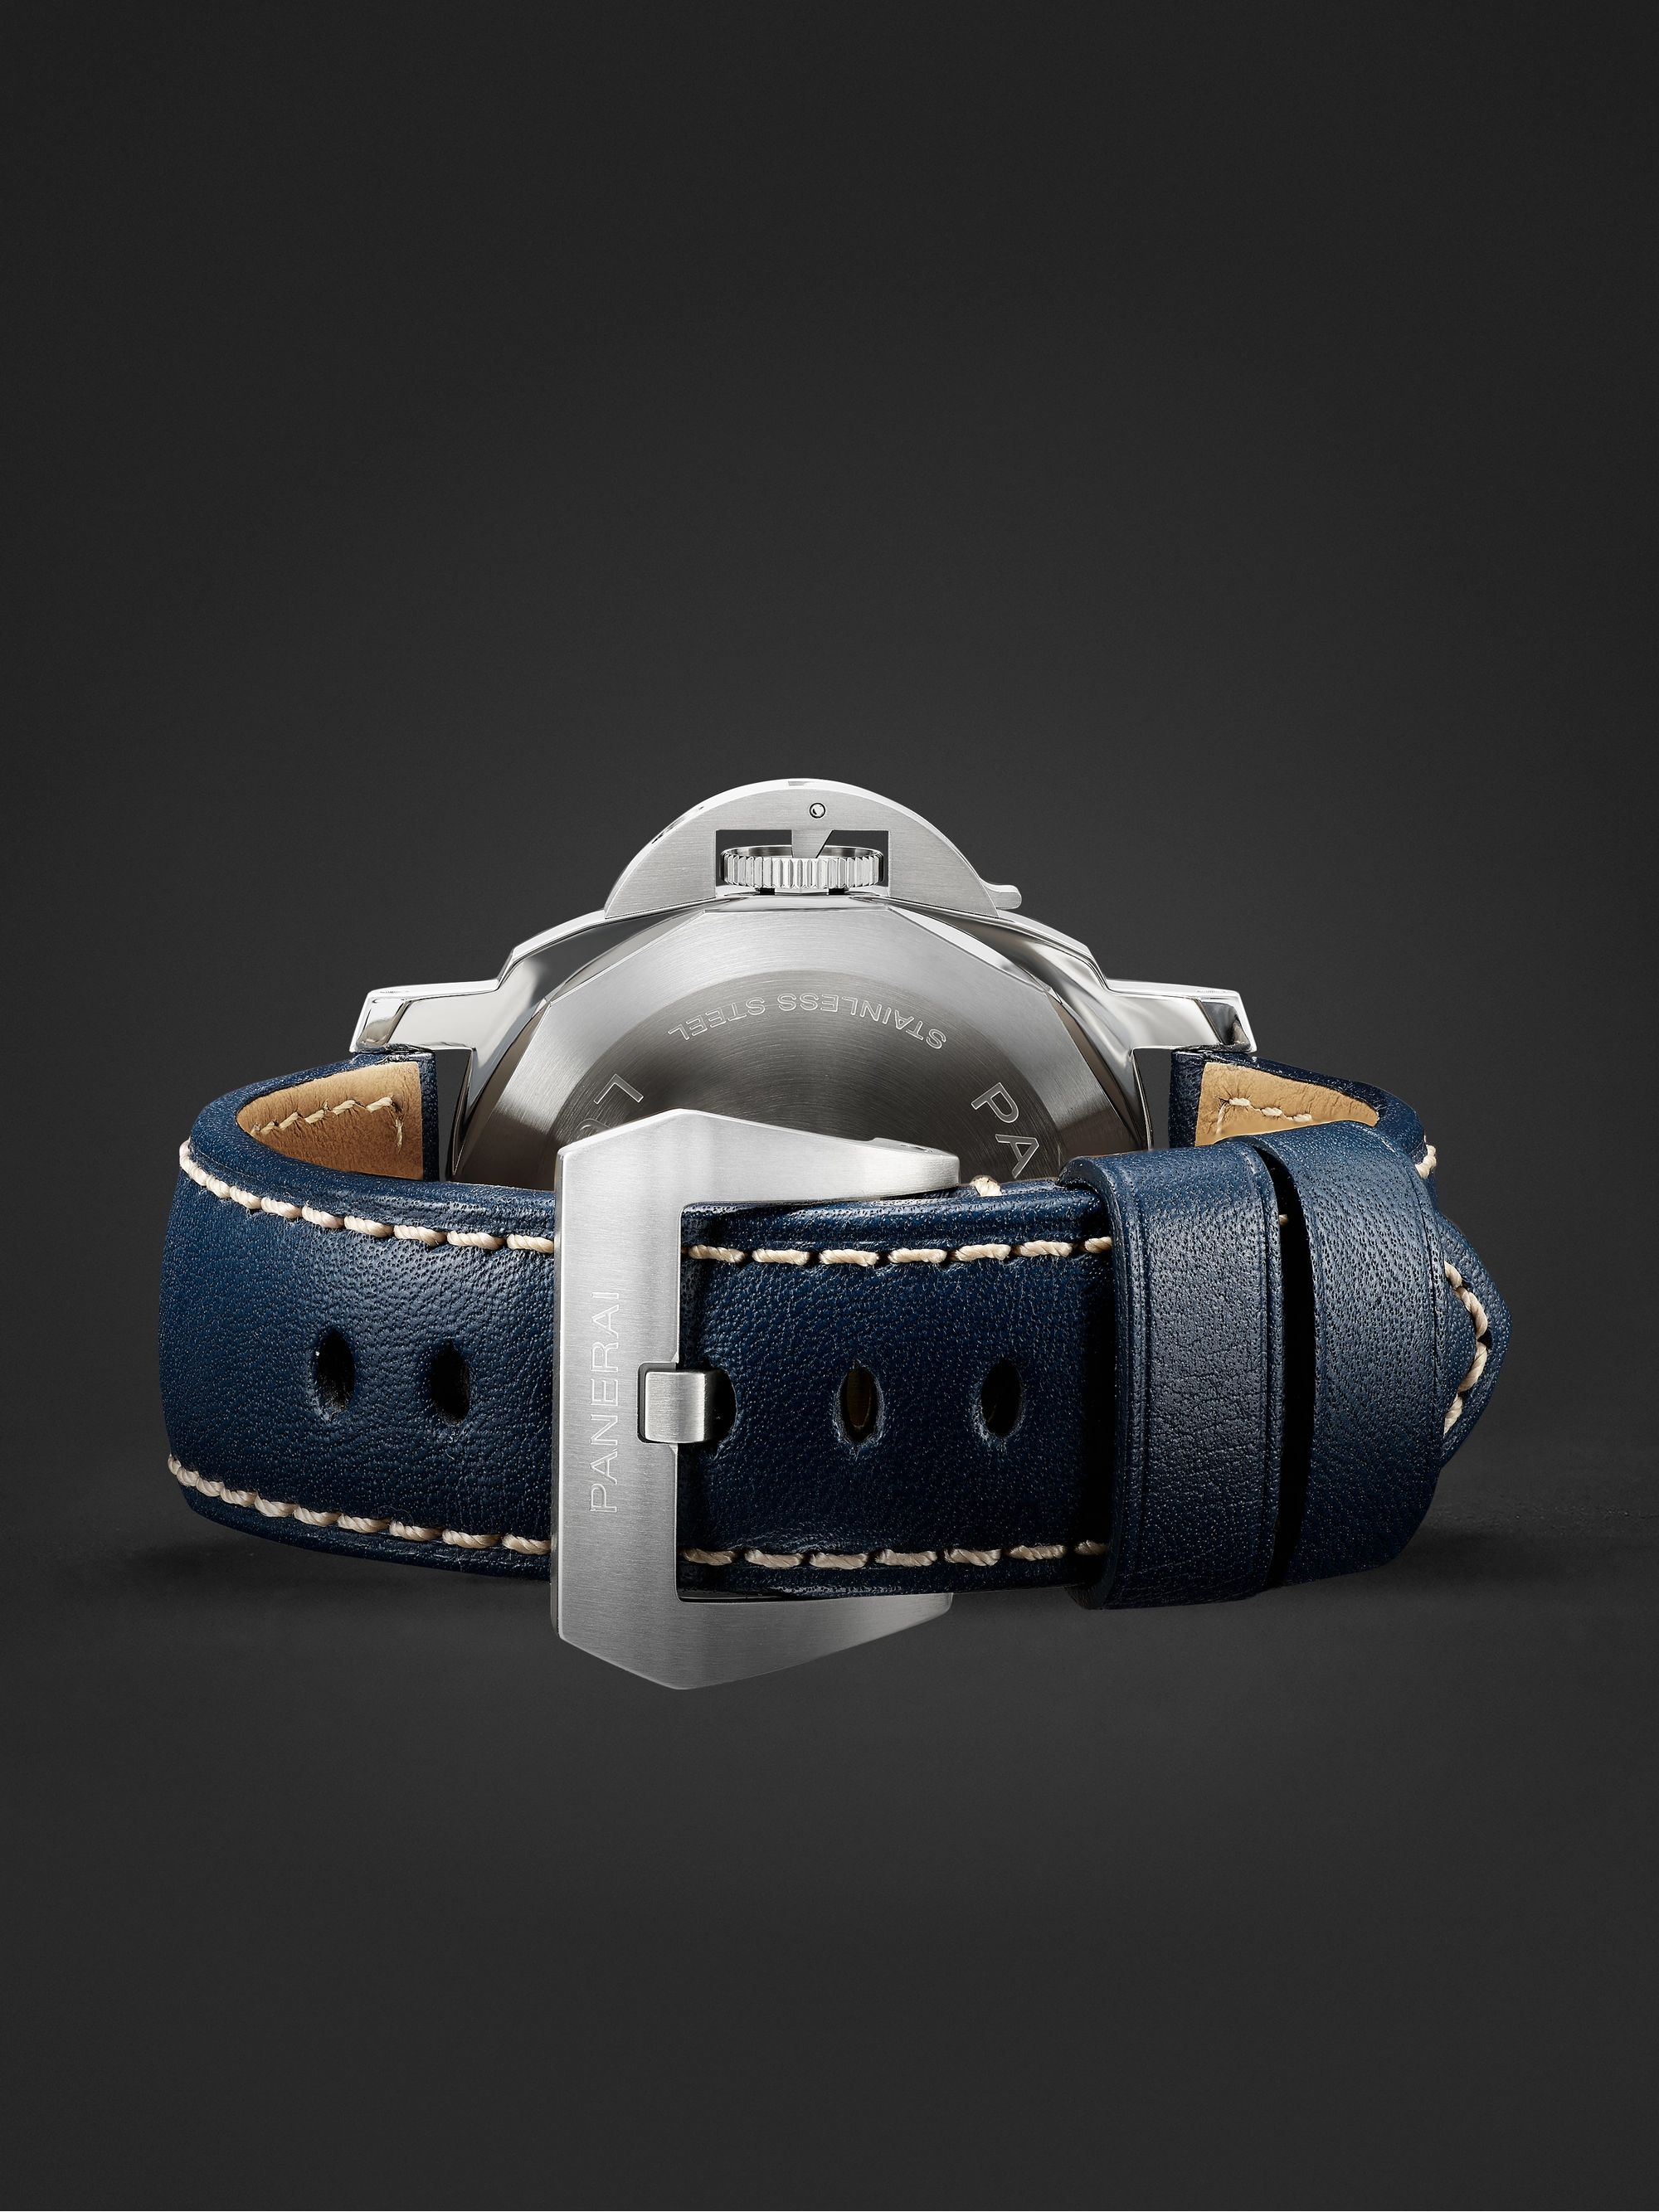 PANERAI Luminor Blu Mare Hand-Wound 44mm Stainless Steel and Leather Watch, Ref. No. PAM1085